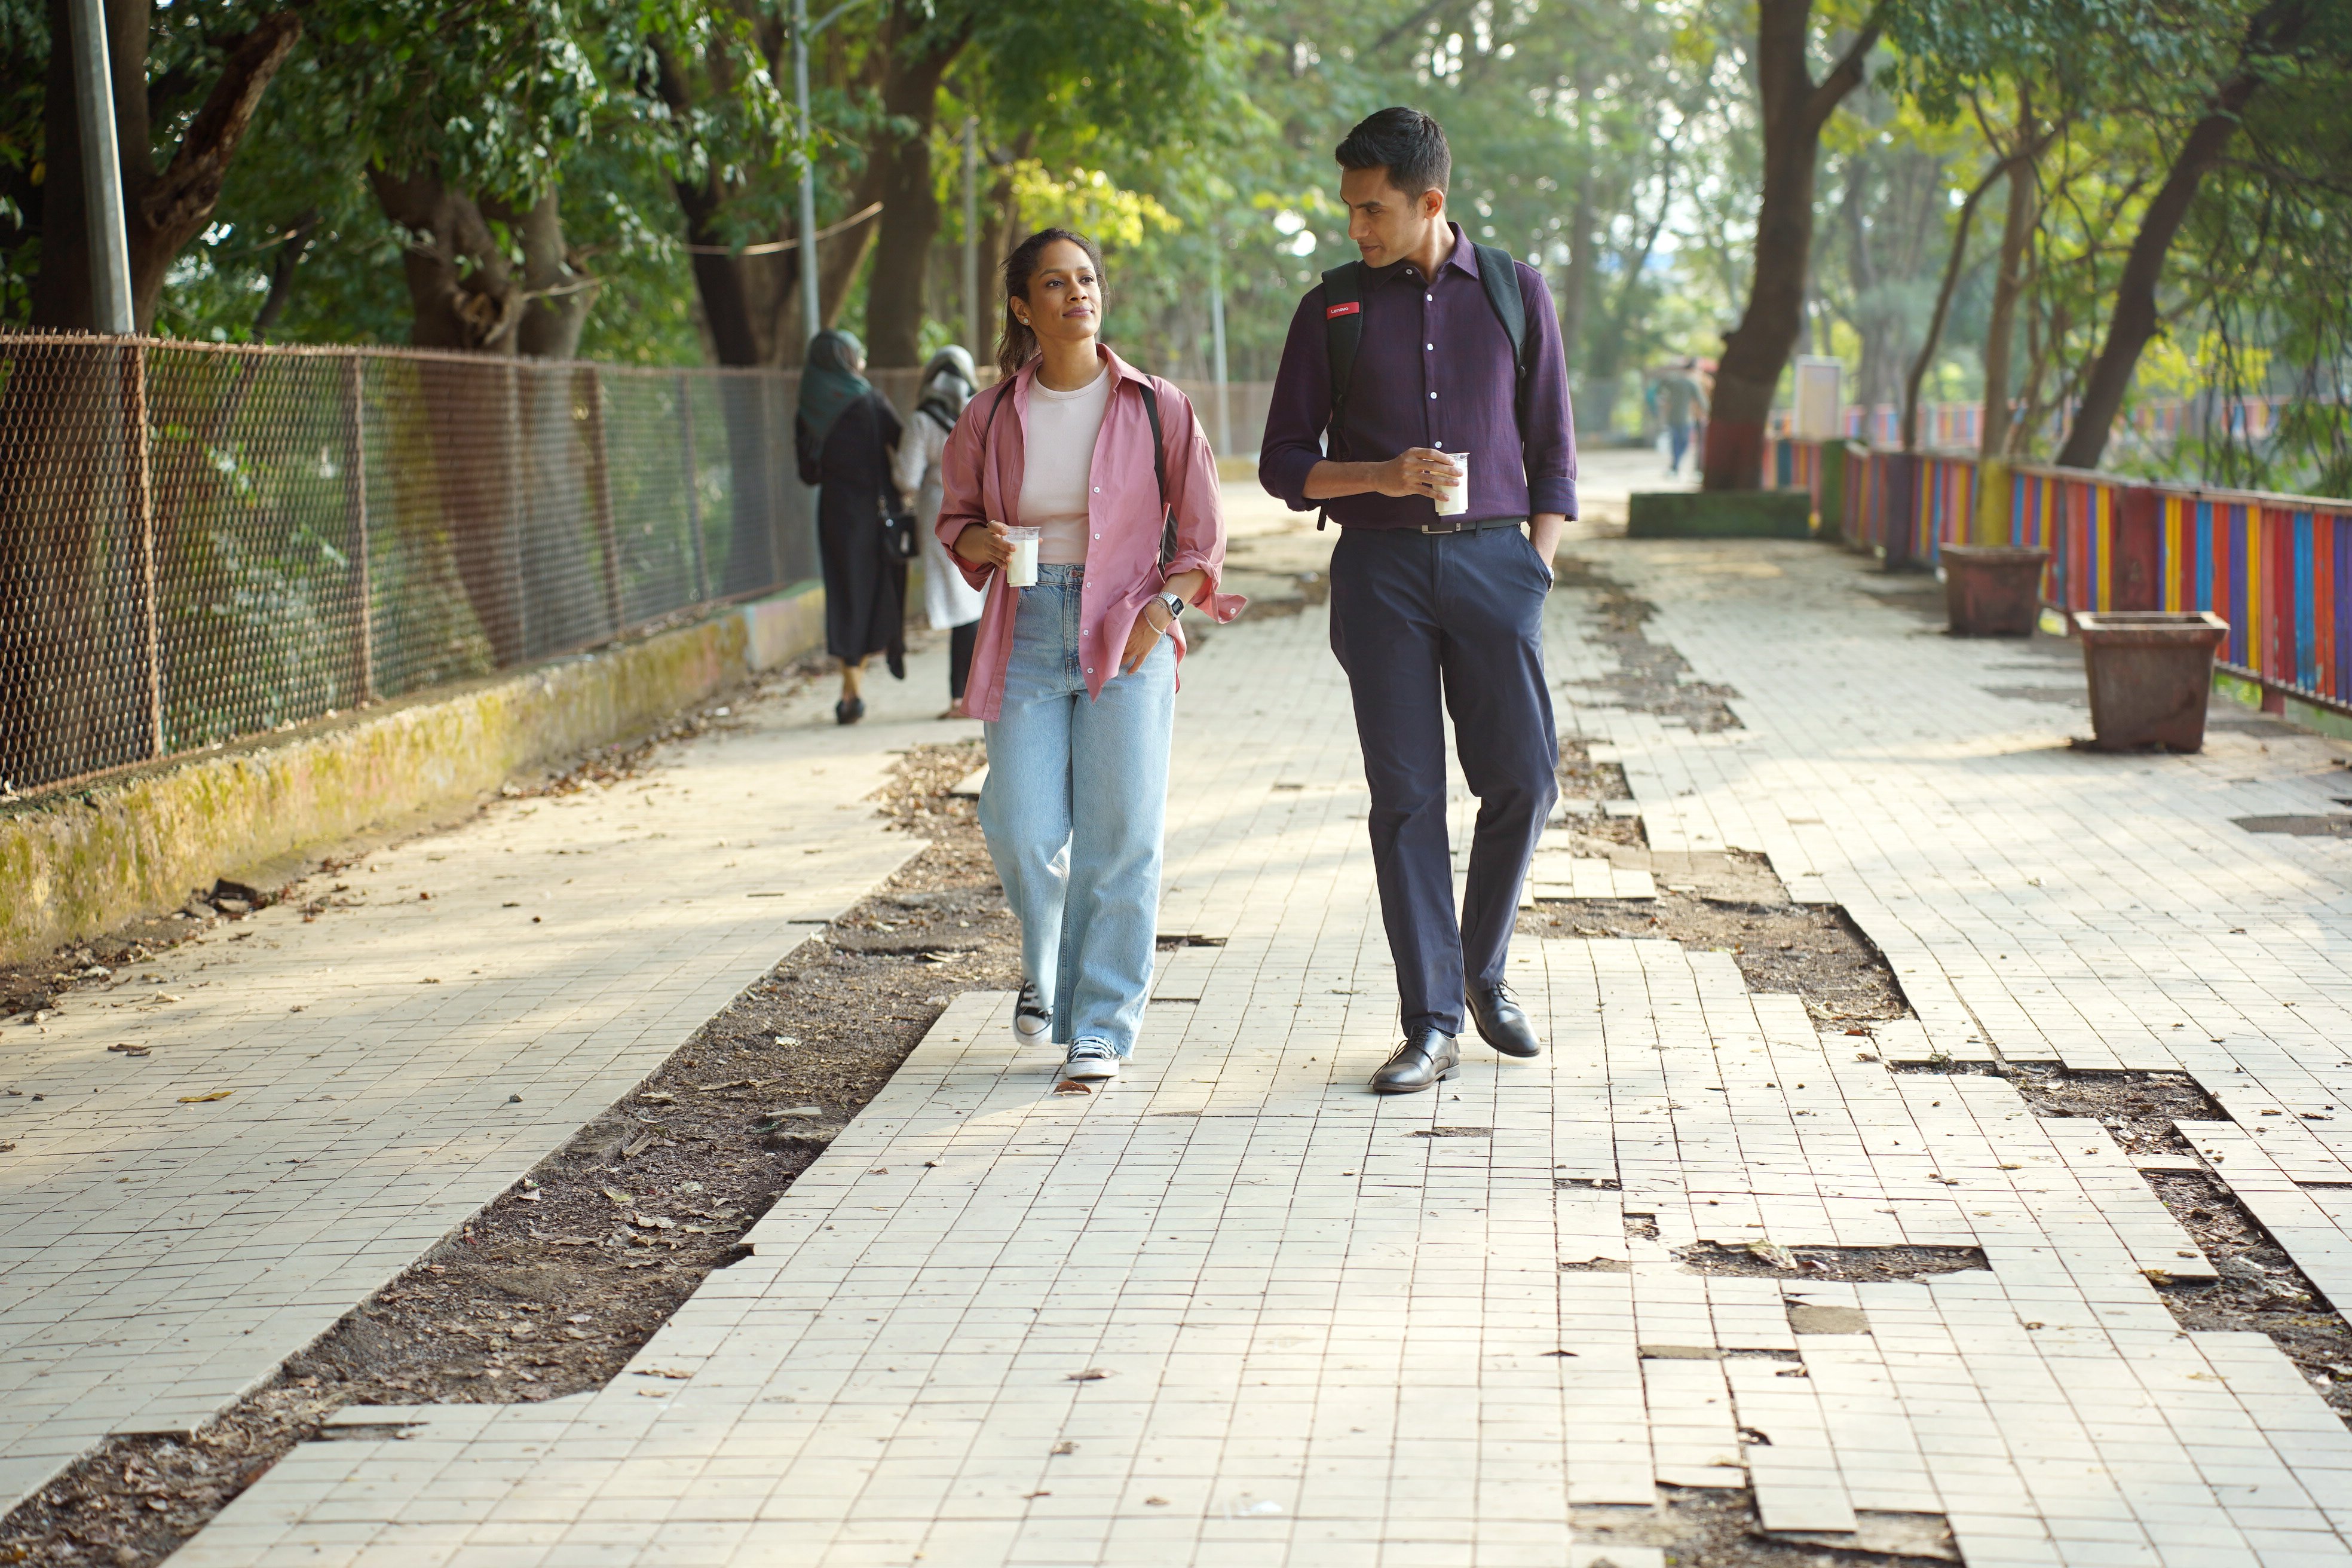 A still from 'Modern Love Mumbai' with two male and female characters walking alongside each other.